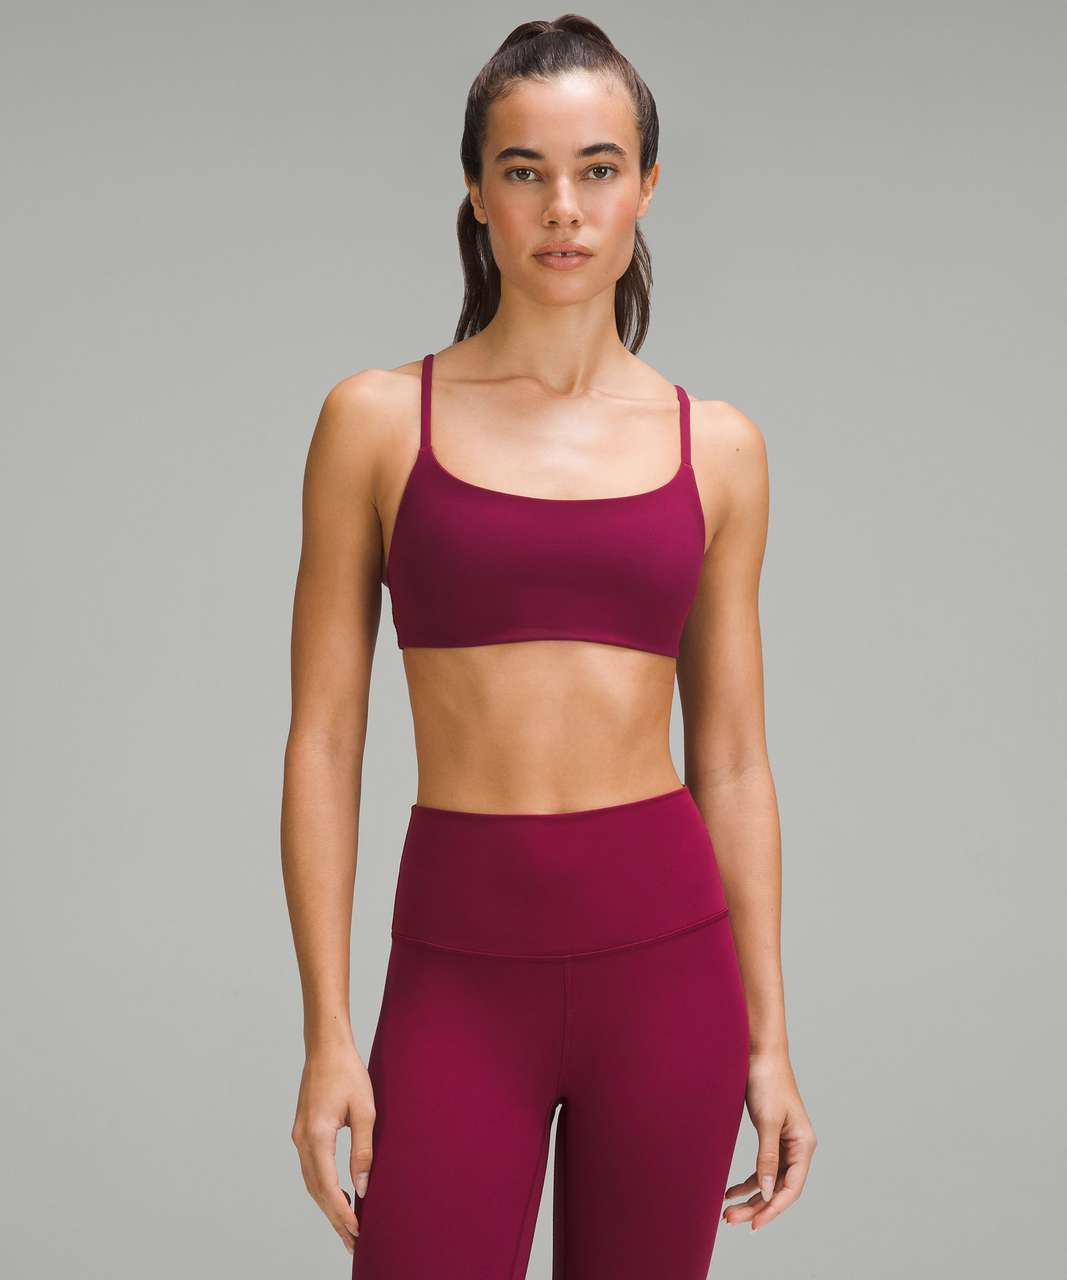 Lululemon Wunder Train Strappy Racer Bra *Light Support, A/B Cup - Deep Luxe